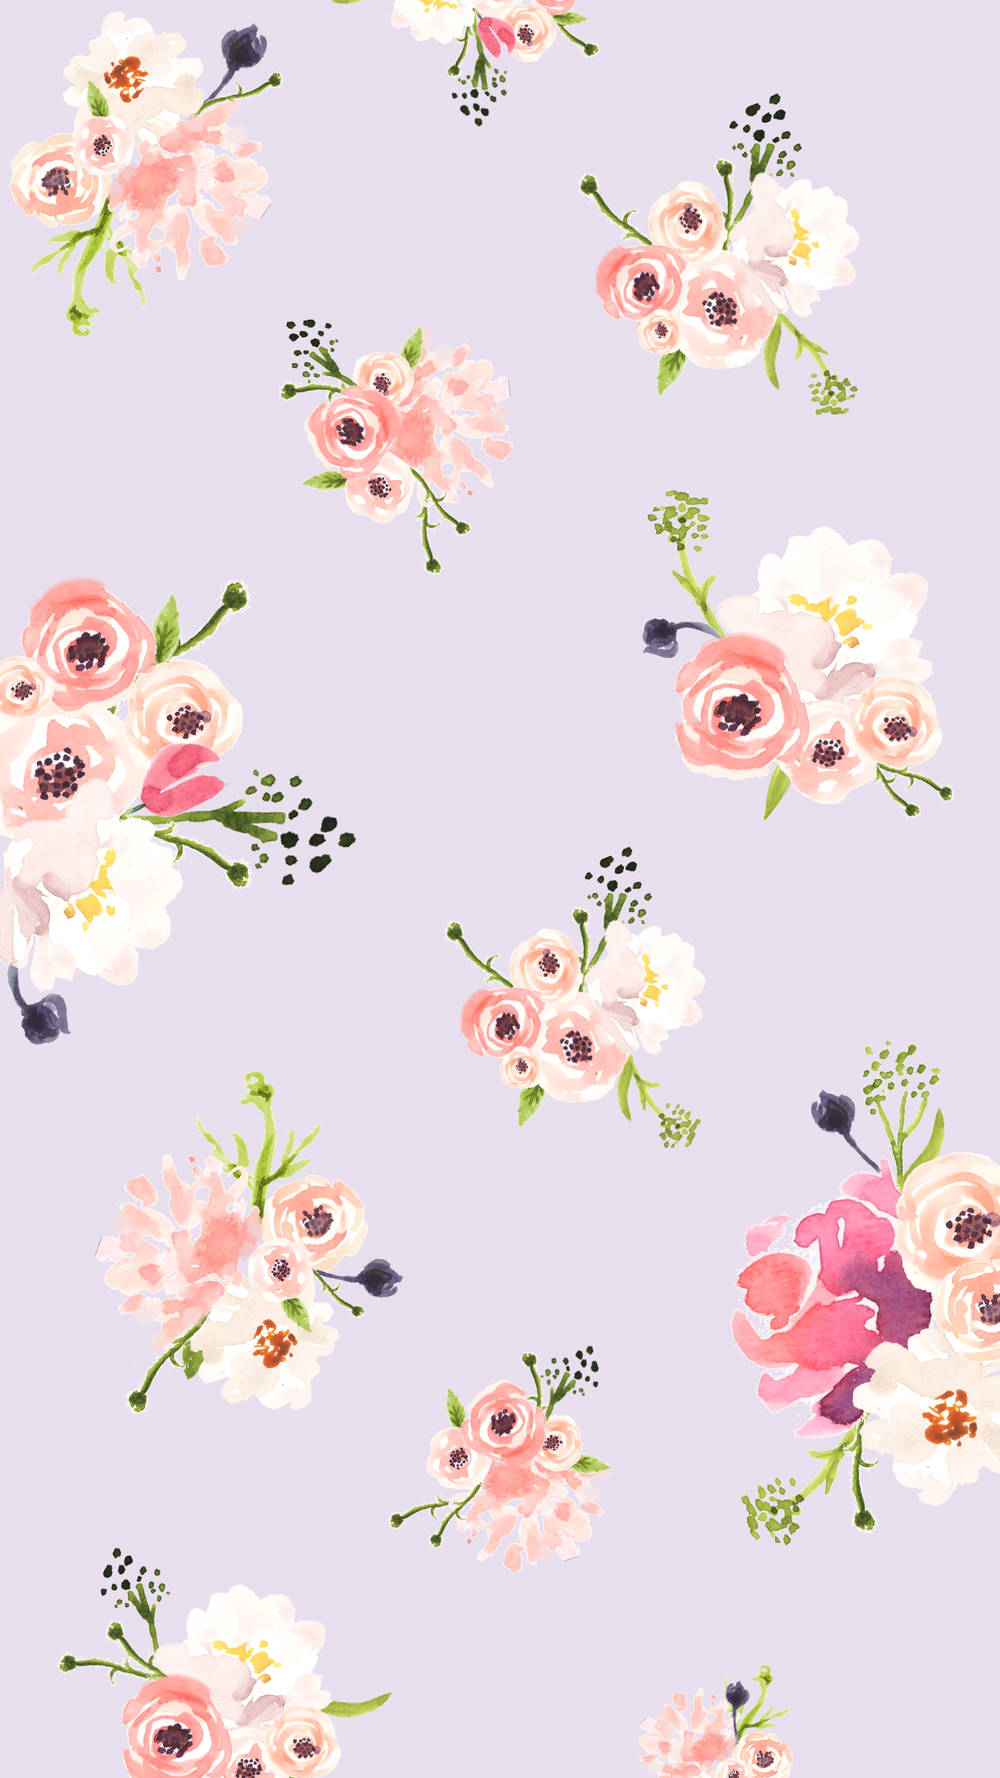 Celebrate Spring with a Cute Phone! Wallpaper